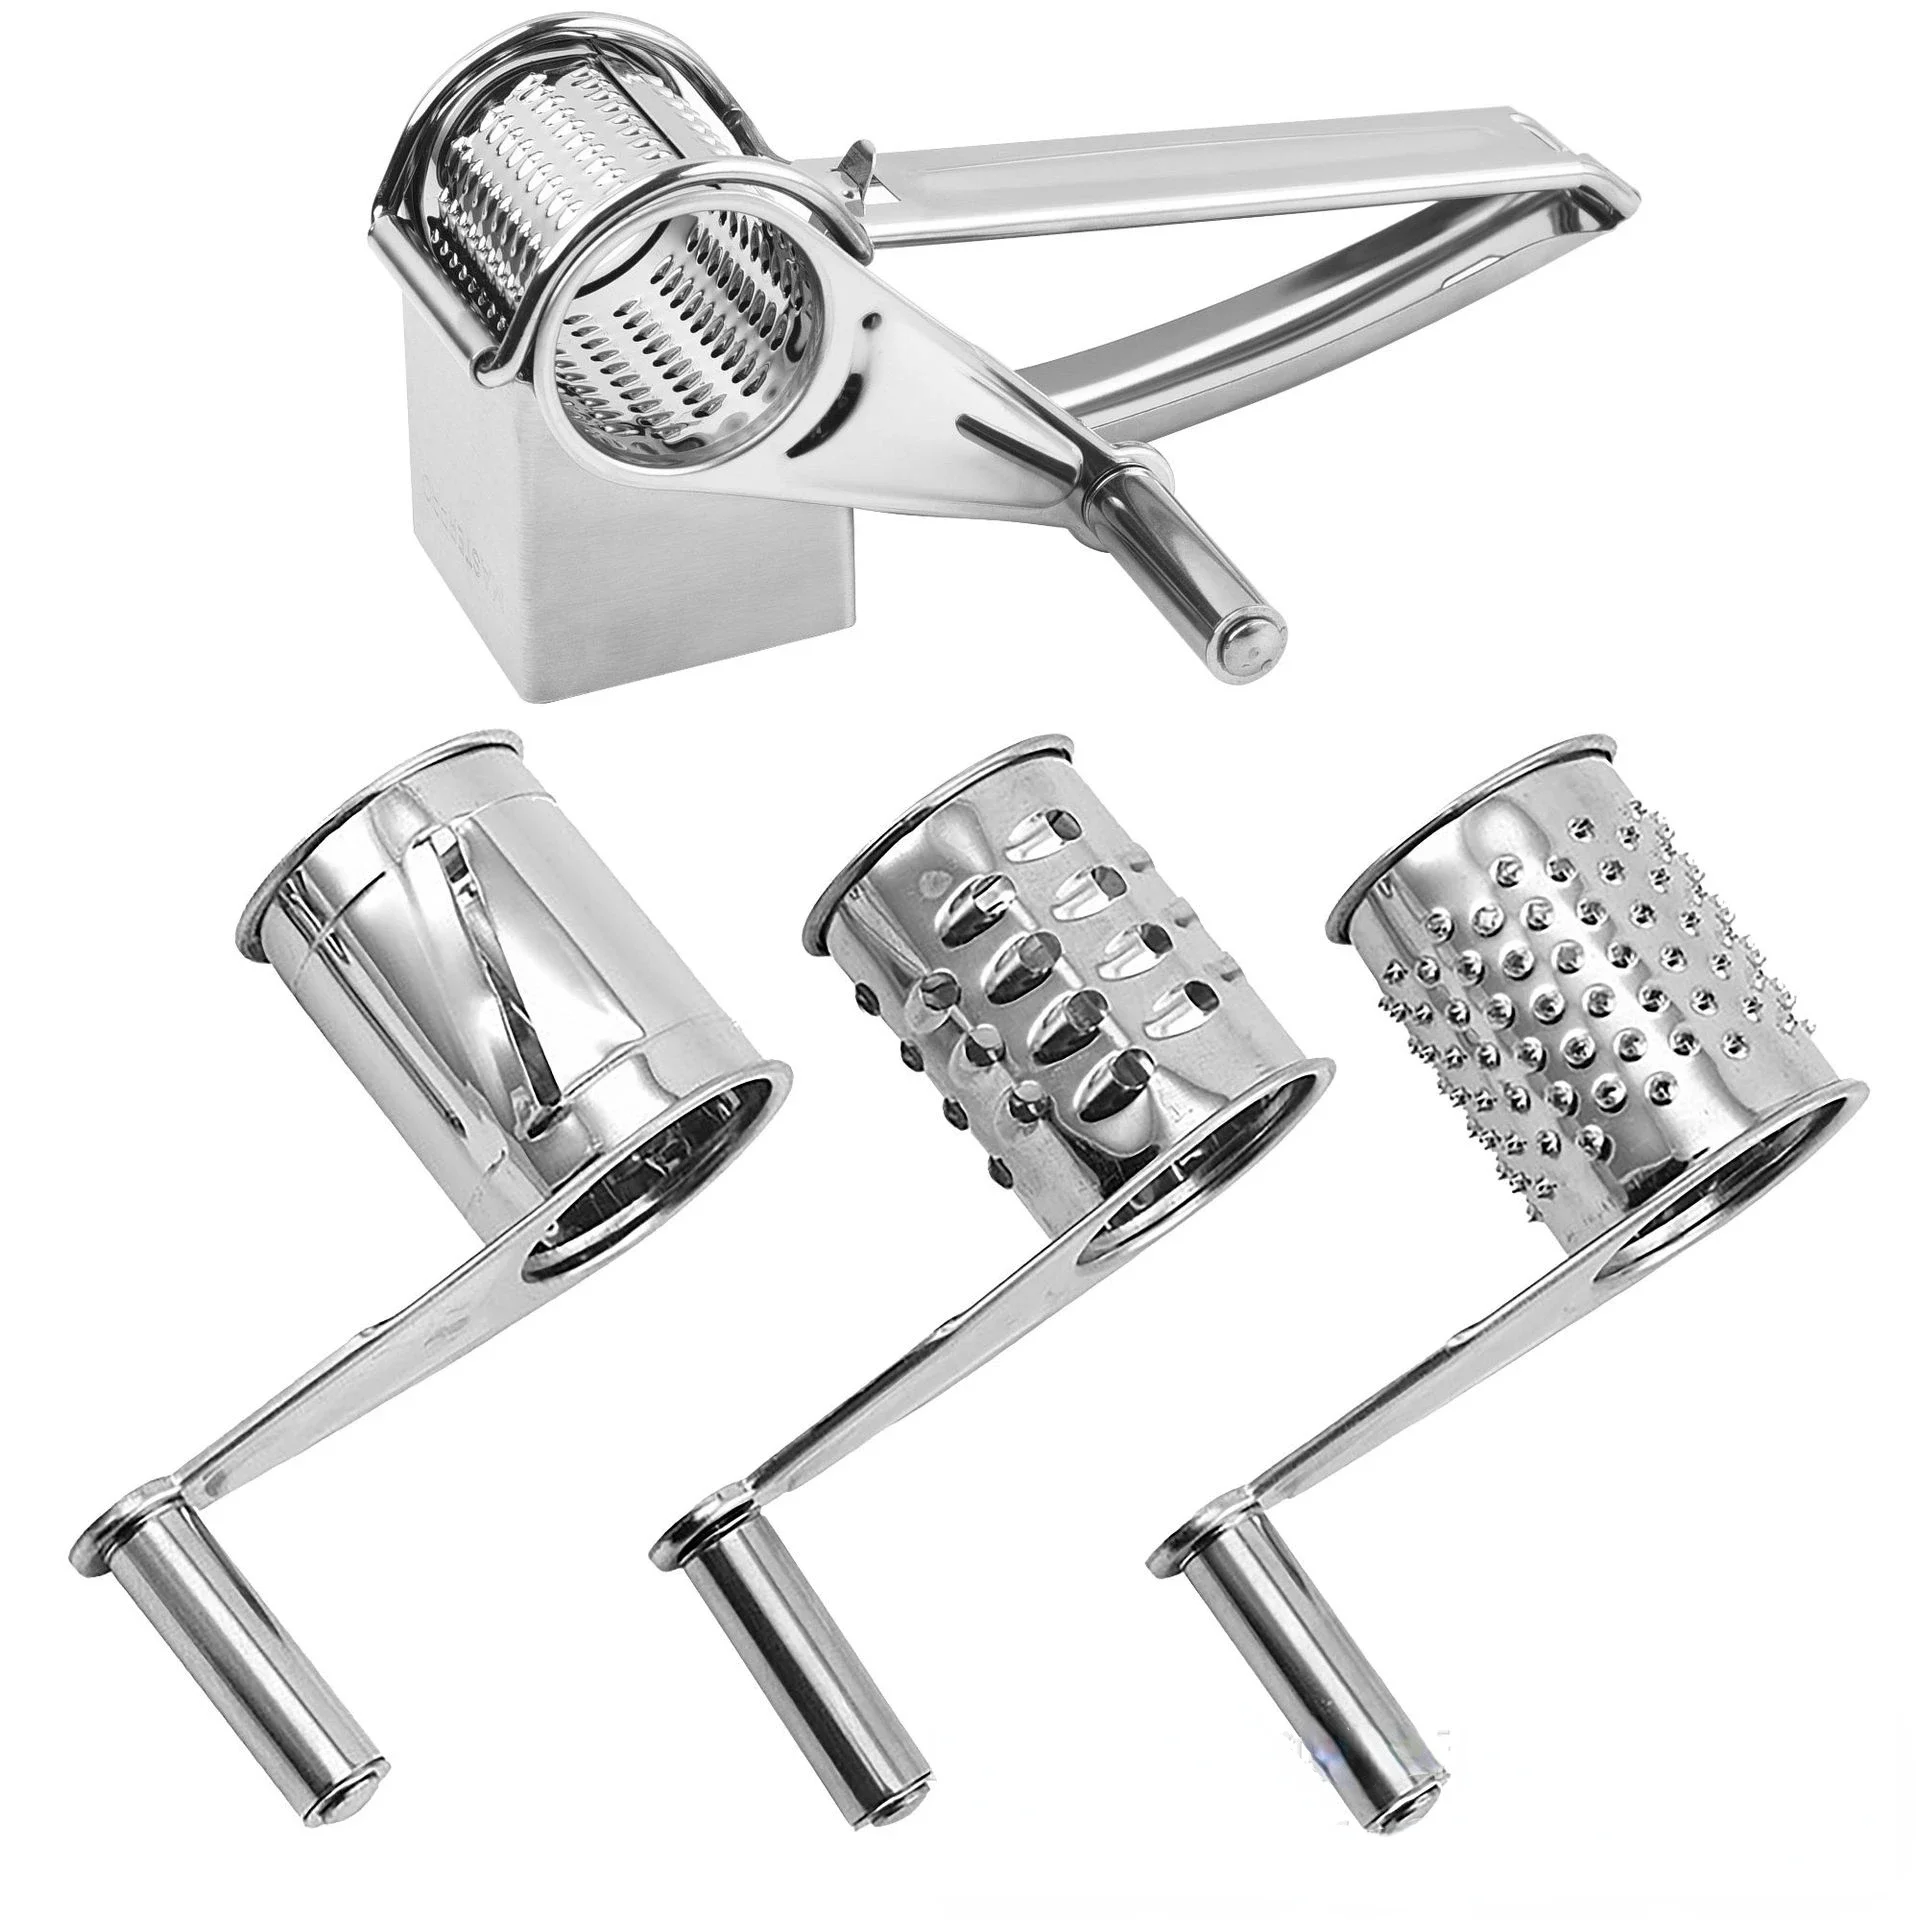 https://ae01.alicdn.com/kf/Sc2e83f98c3e44ebc829ce647bd30b688x/Rotary-Cheese-Grater-1-2-3-4-Drums-Blades-Stainless-Steel-Cheese-Cutter-Slicer-Cheese-Shredder.jpg